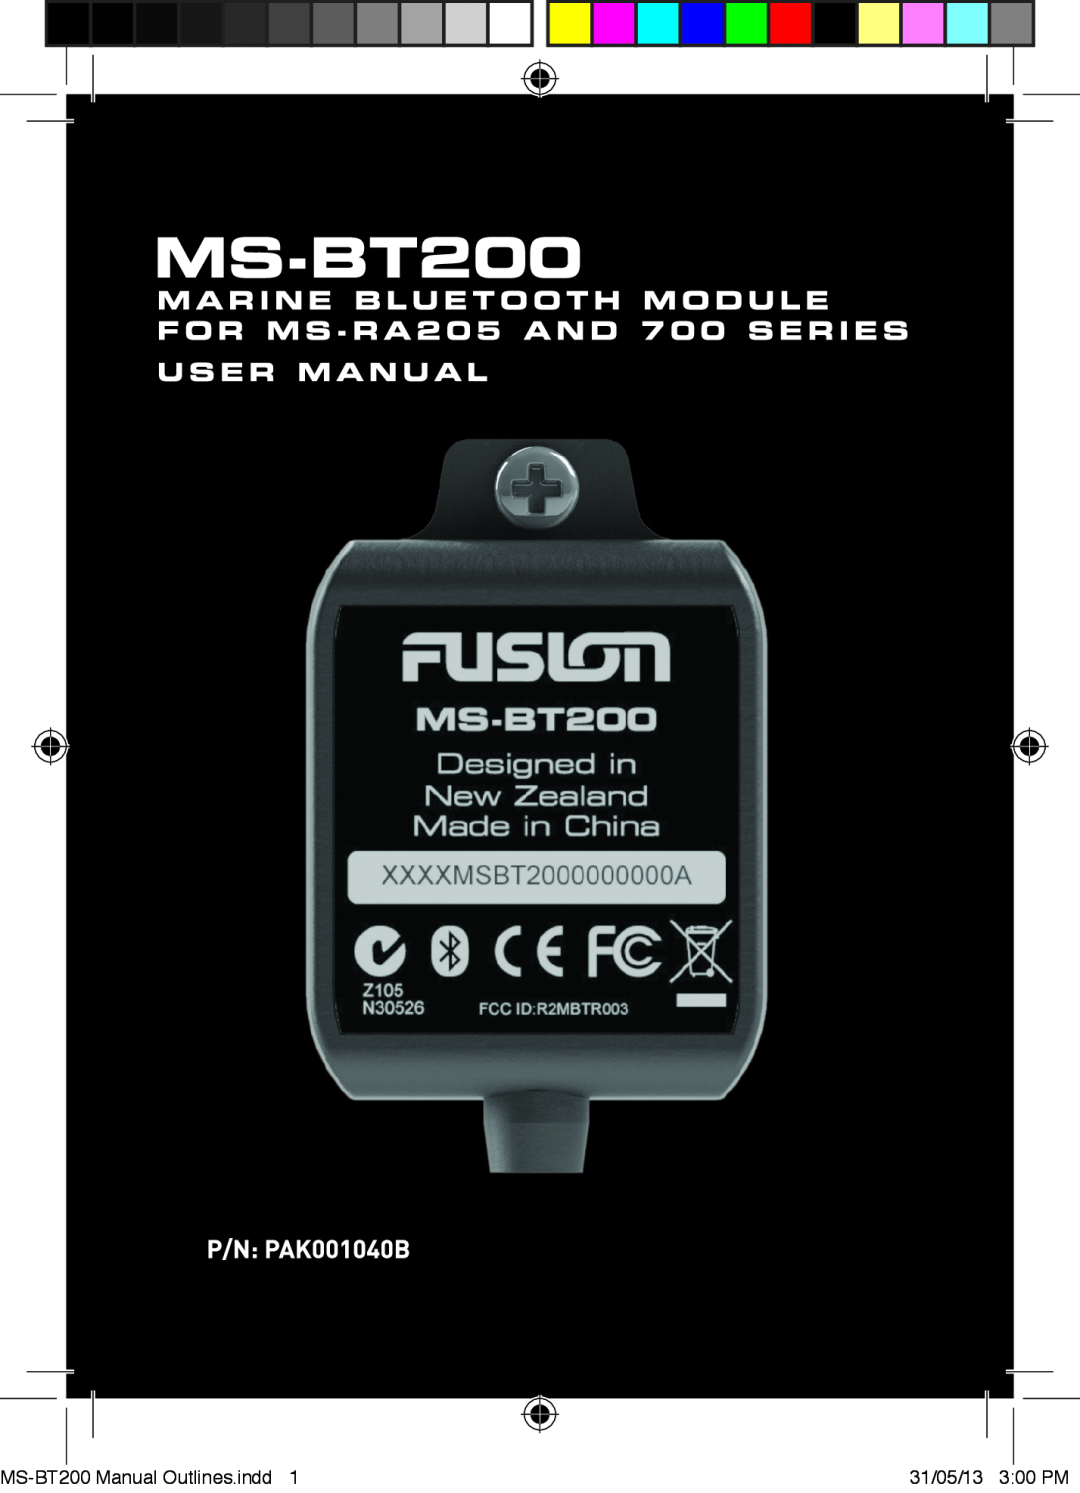 Fusion MS-RA205, 700 manual MS-BT200 Manual Outlines.indd, 31/05/13 300 PM 